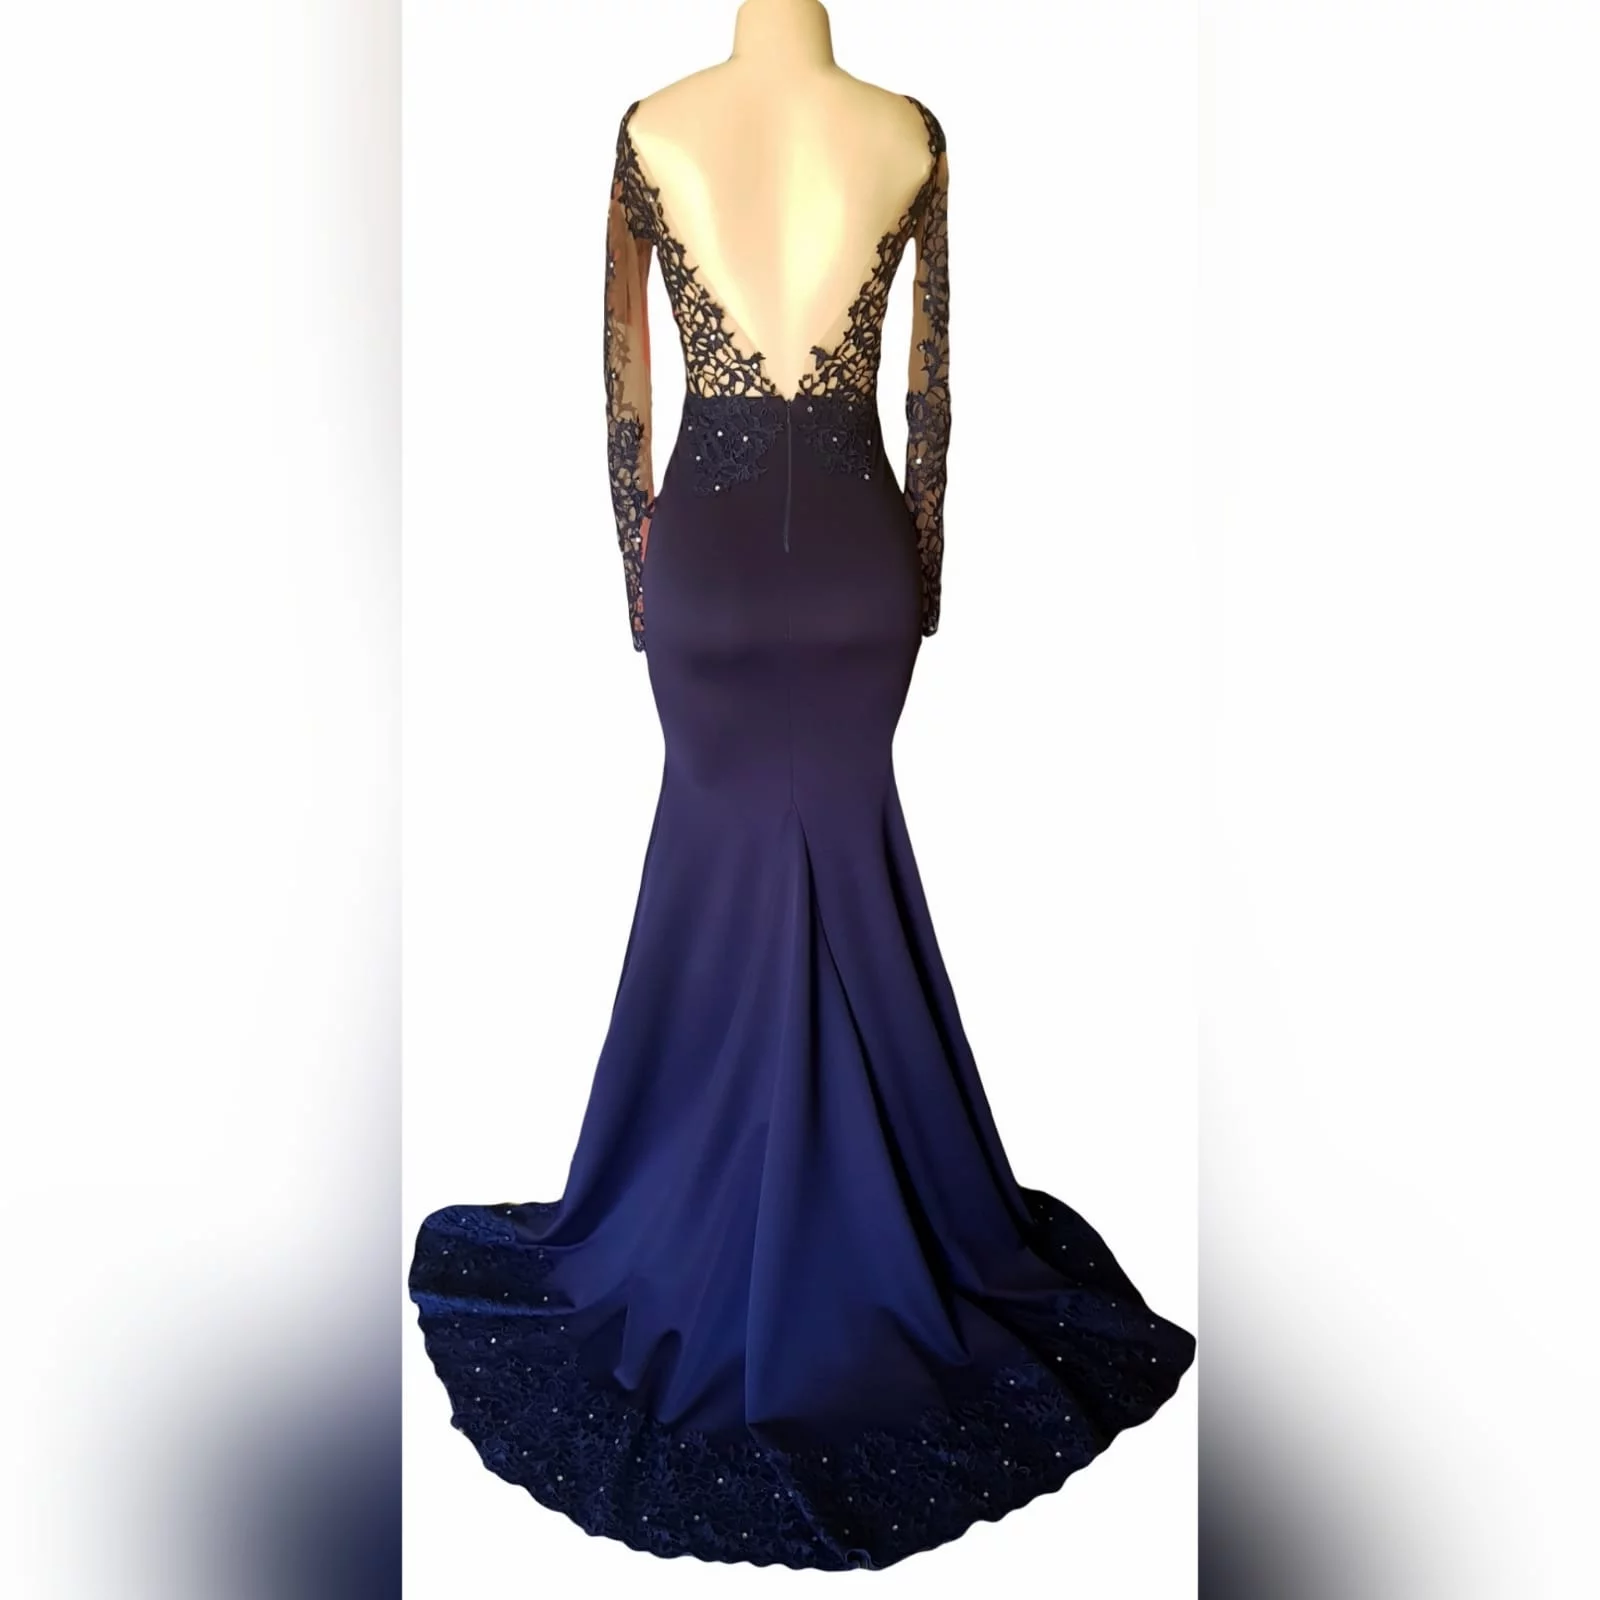 Custom-designed navy blue mermaid prom dress 10 <em>"a girl should be two things: who and what she wants. "</em> <em>coco chanel</em> looking stunning on her prom night, she wore a custom-designed and made the dress to fit her like a glove. This navy blue mermaid prom dress has a sheer lace bodice and sleeves, a lace border and scattered silver beads. A dramatic train and a v open back.